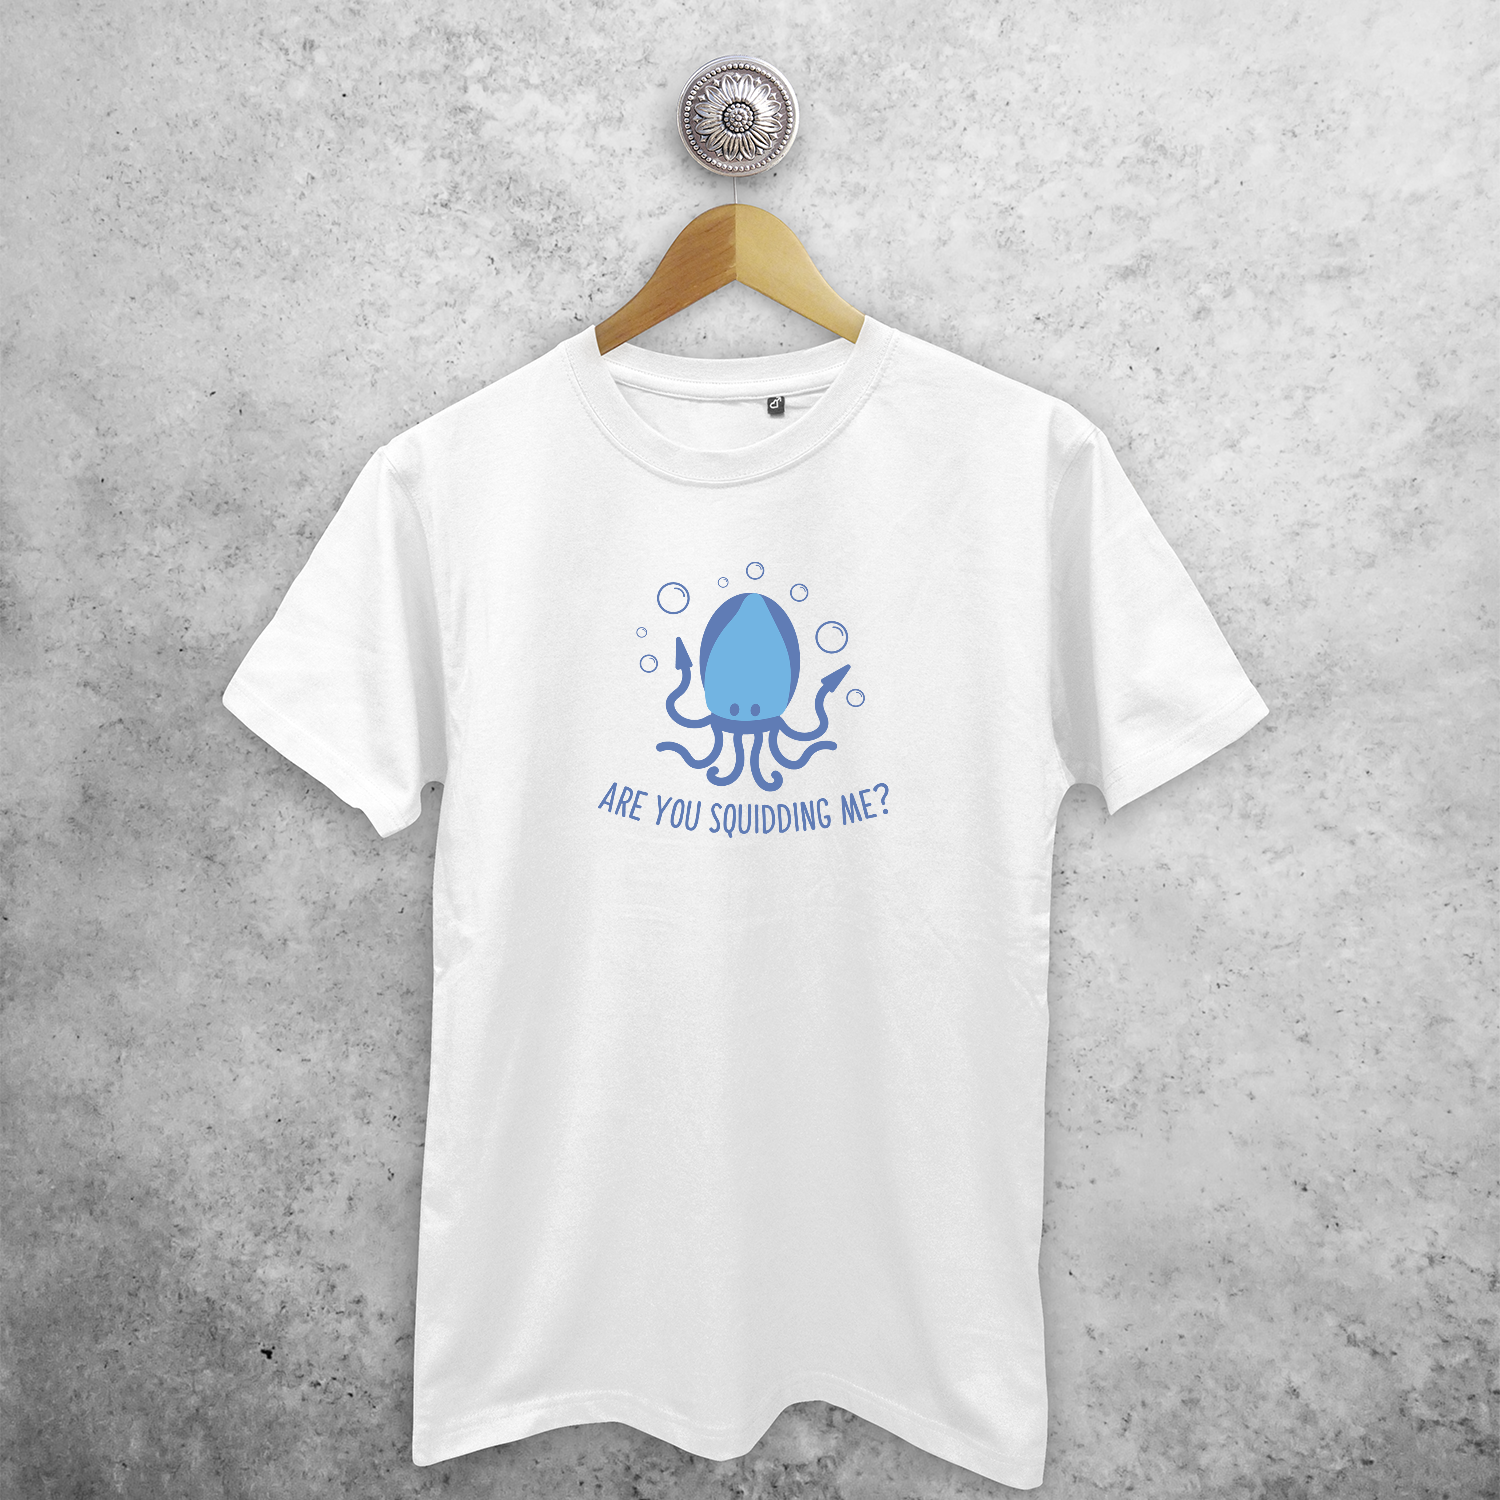 'Are you squidding me?' adult shirt